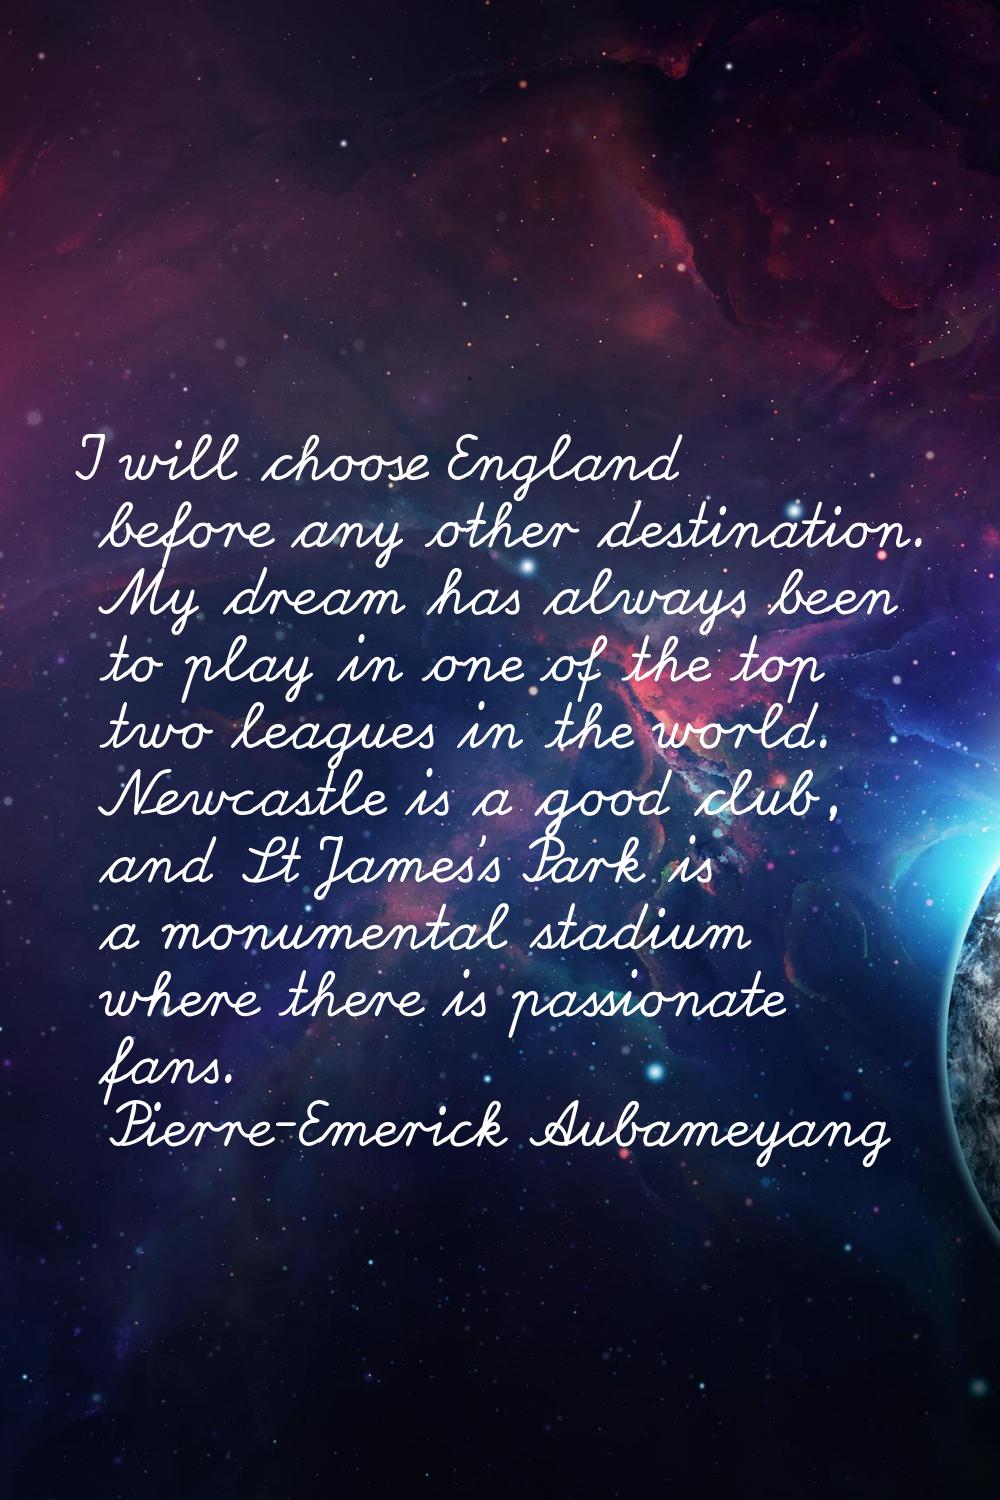 I will choose England before any other destination. My dream has always been to play in one of the 